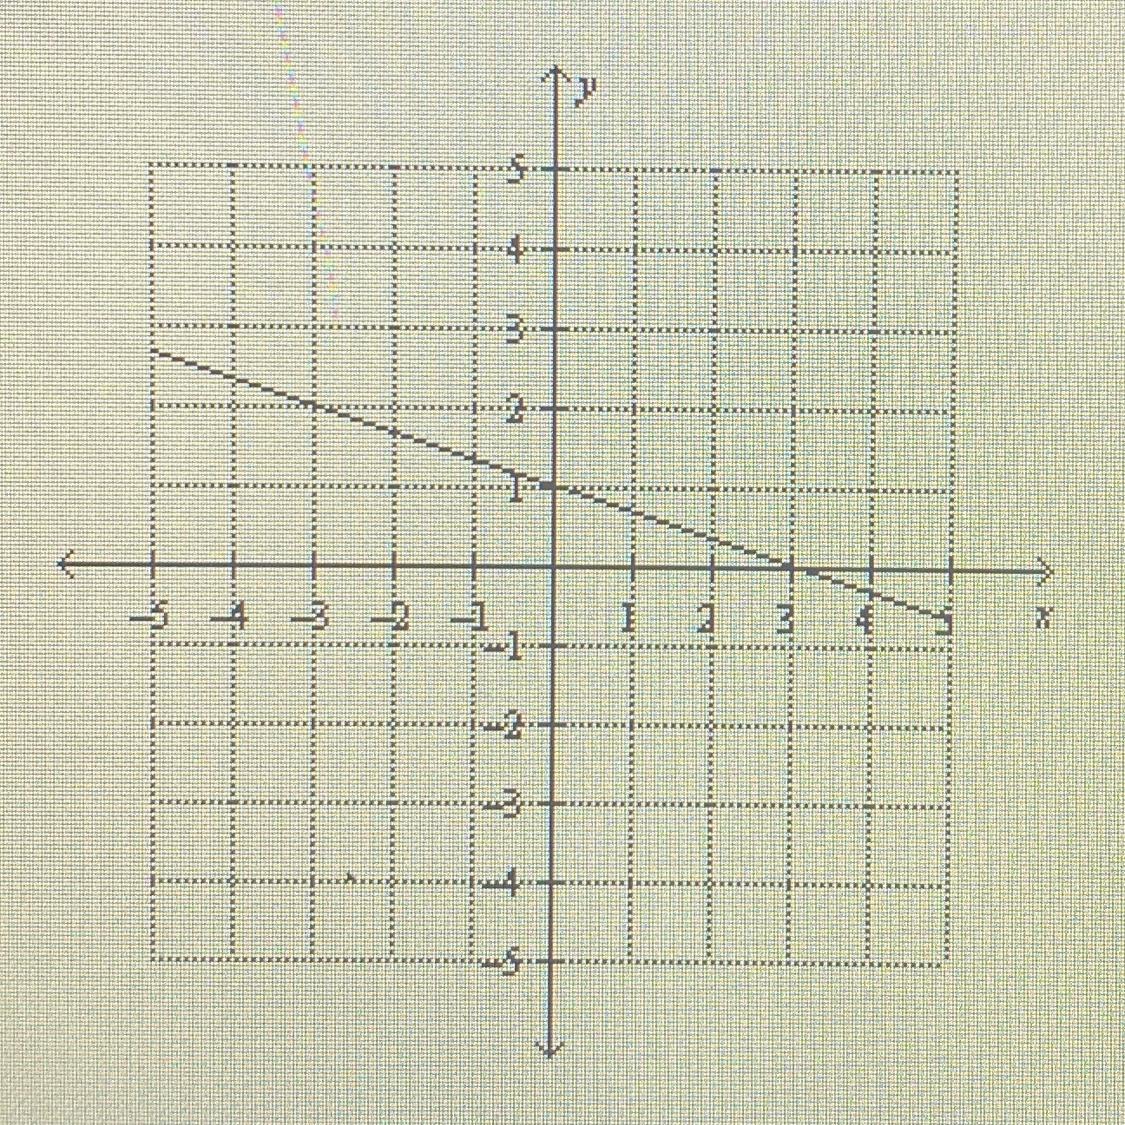 What Is The Equation Of The Graphed Function?A. F(x) = -1/3x + 1B. F(x) = 3x + 1C. F(x) = 1/3x + 1D.